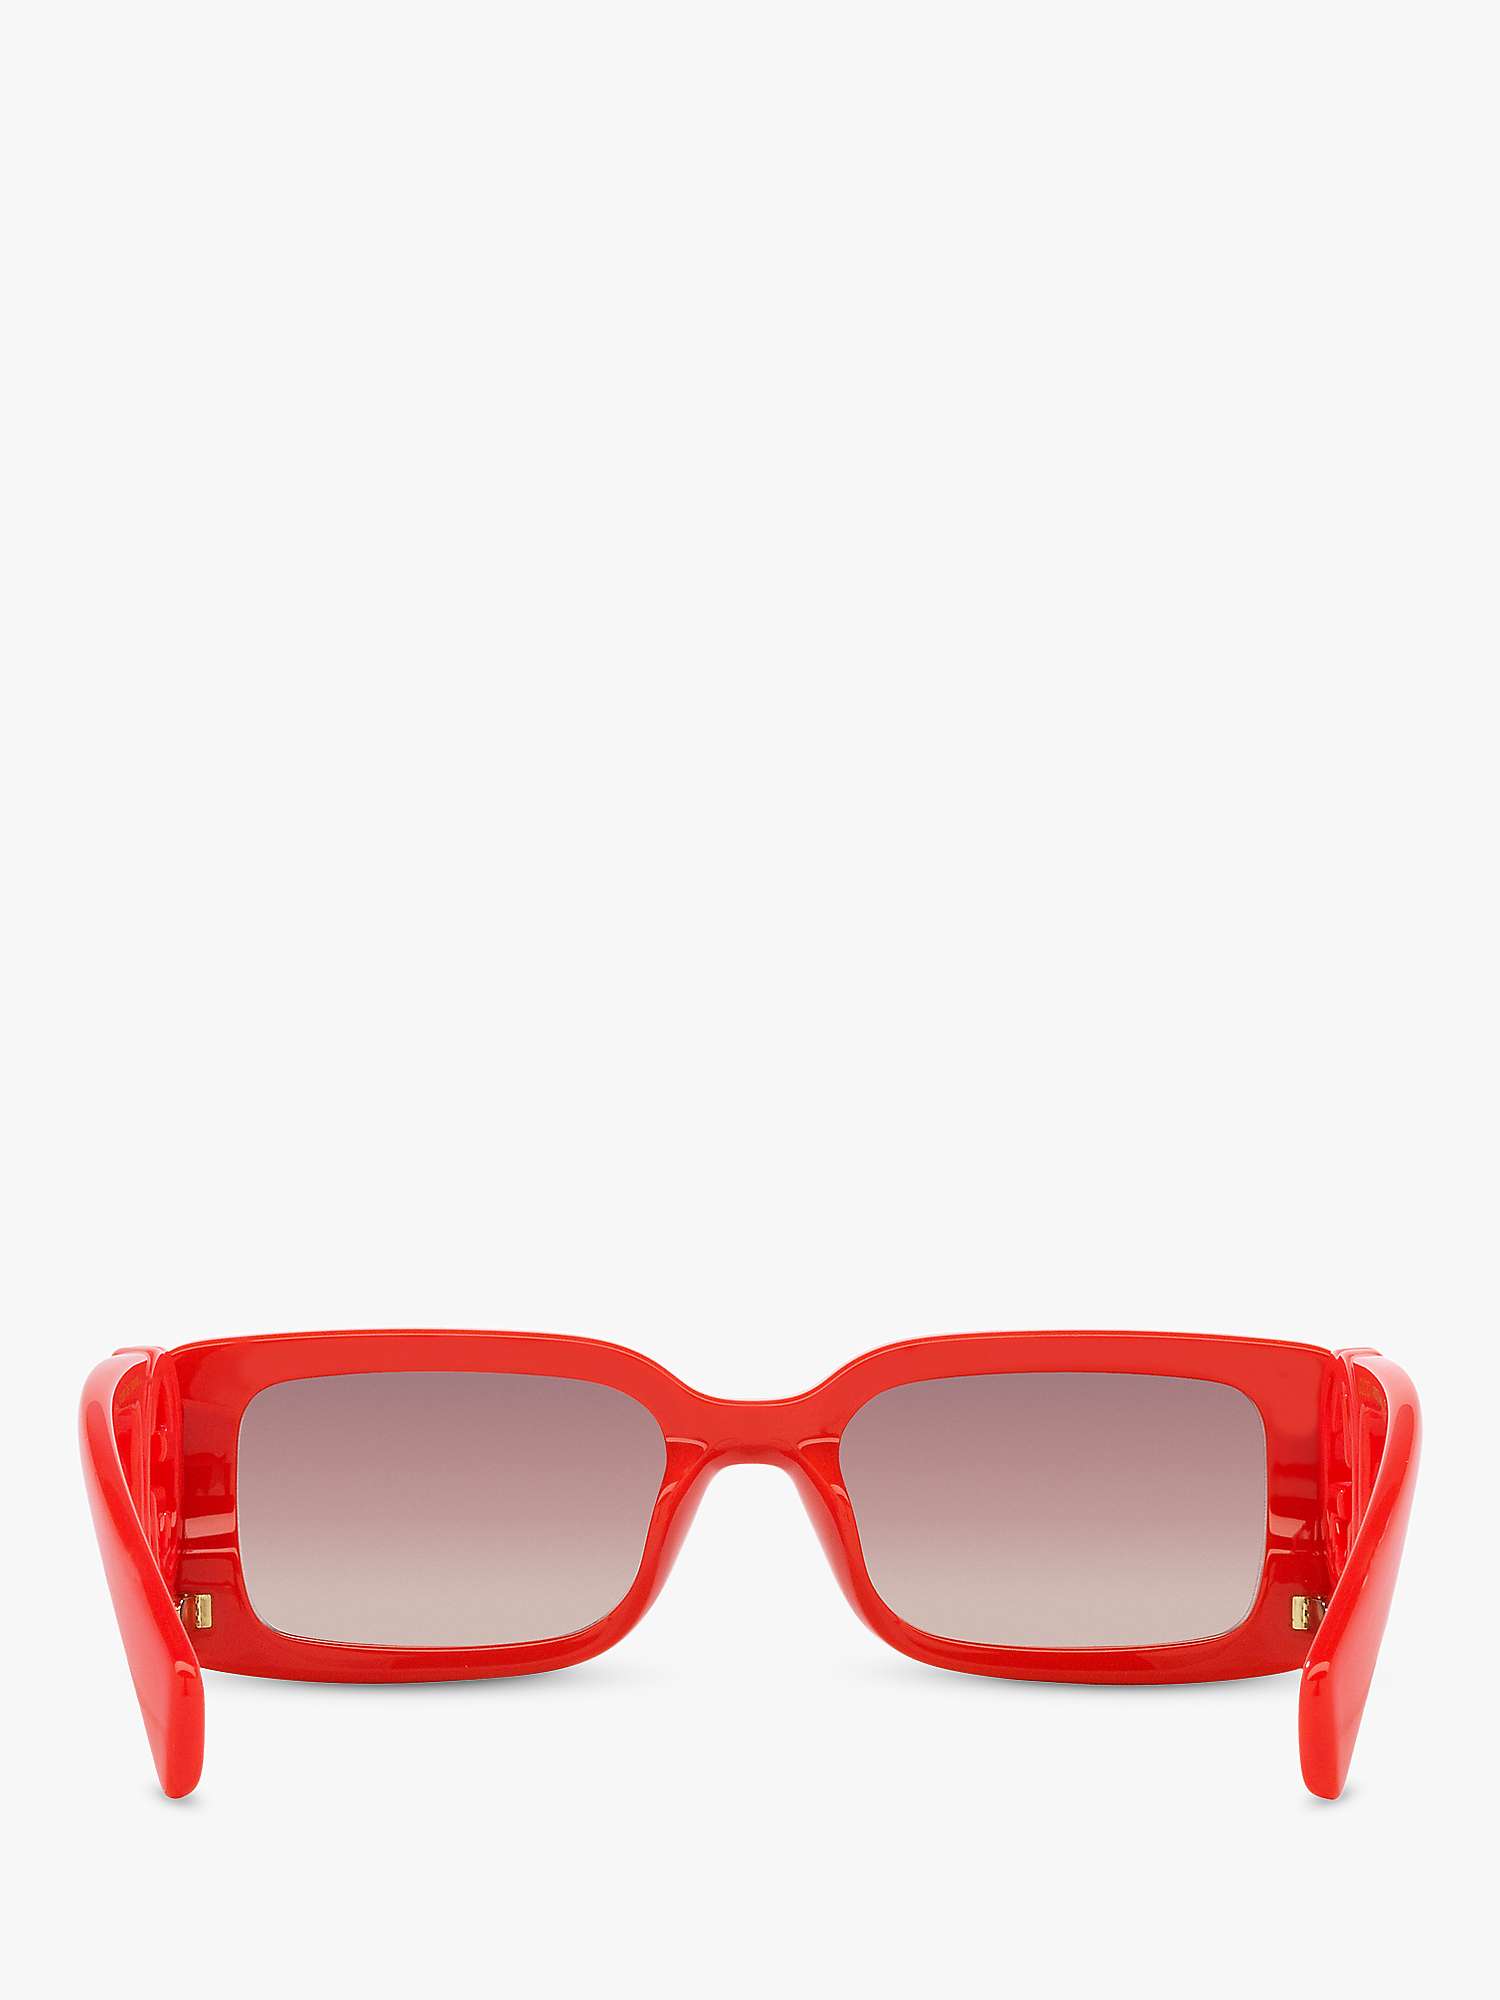 Buy Gucci GG1325S Women's Rectangular Sunglasses, Shiny Red/Brown Gradient Online at johnlewis.com